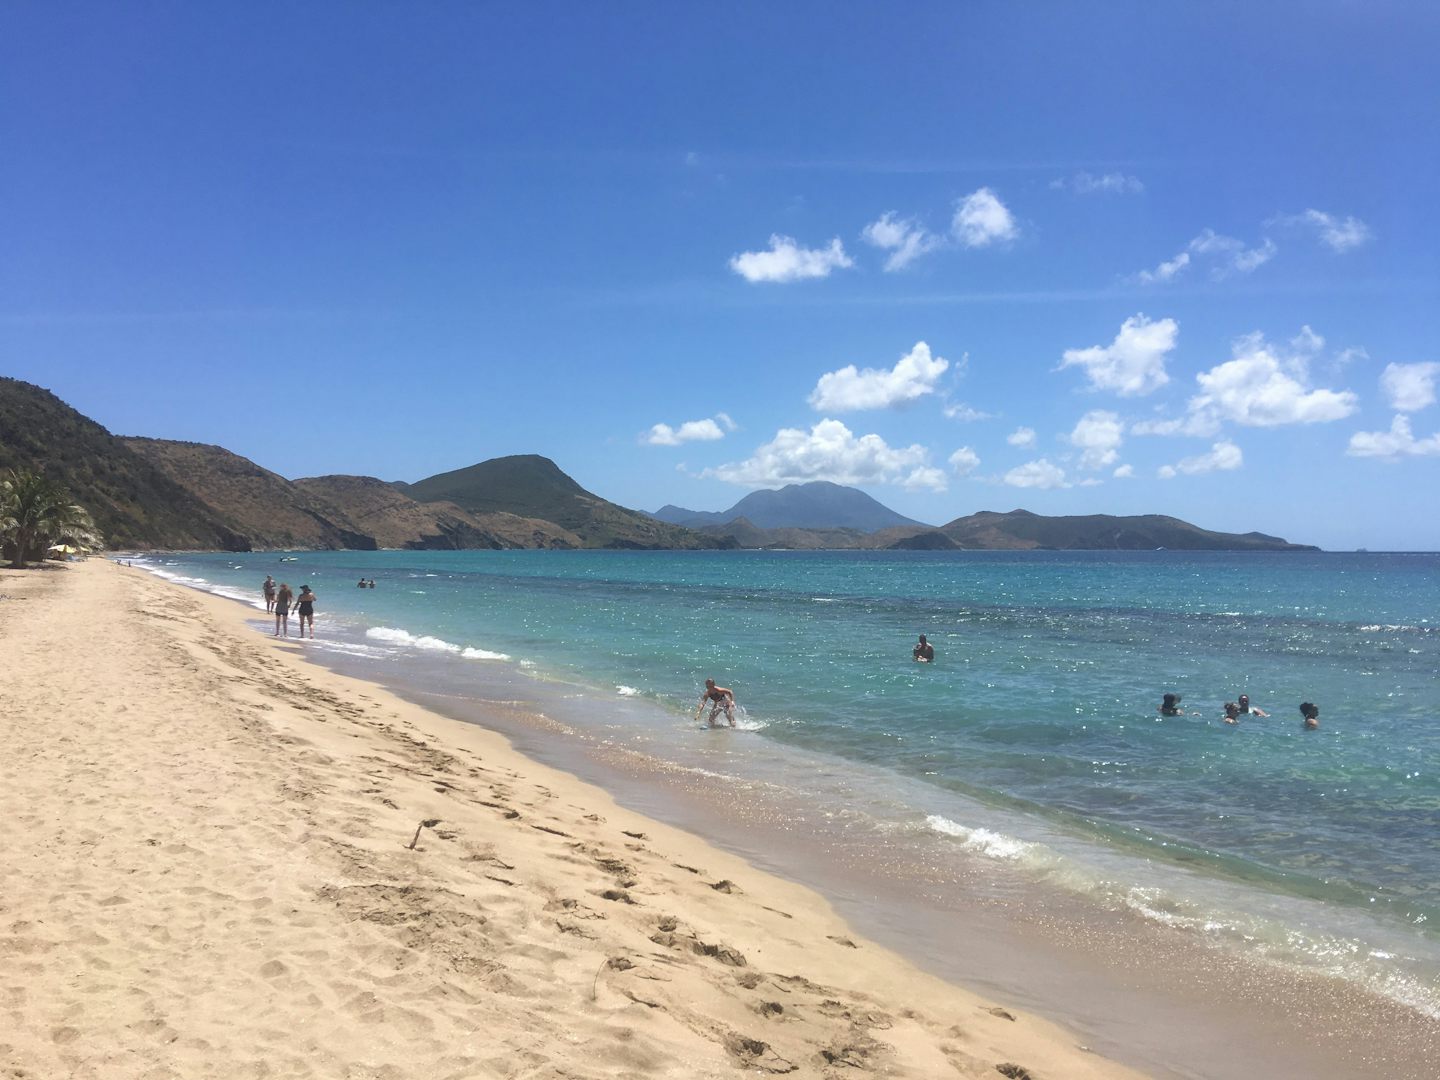 The Beach at St. Kitts